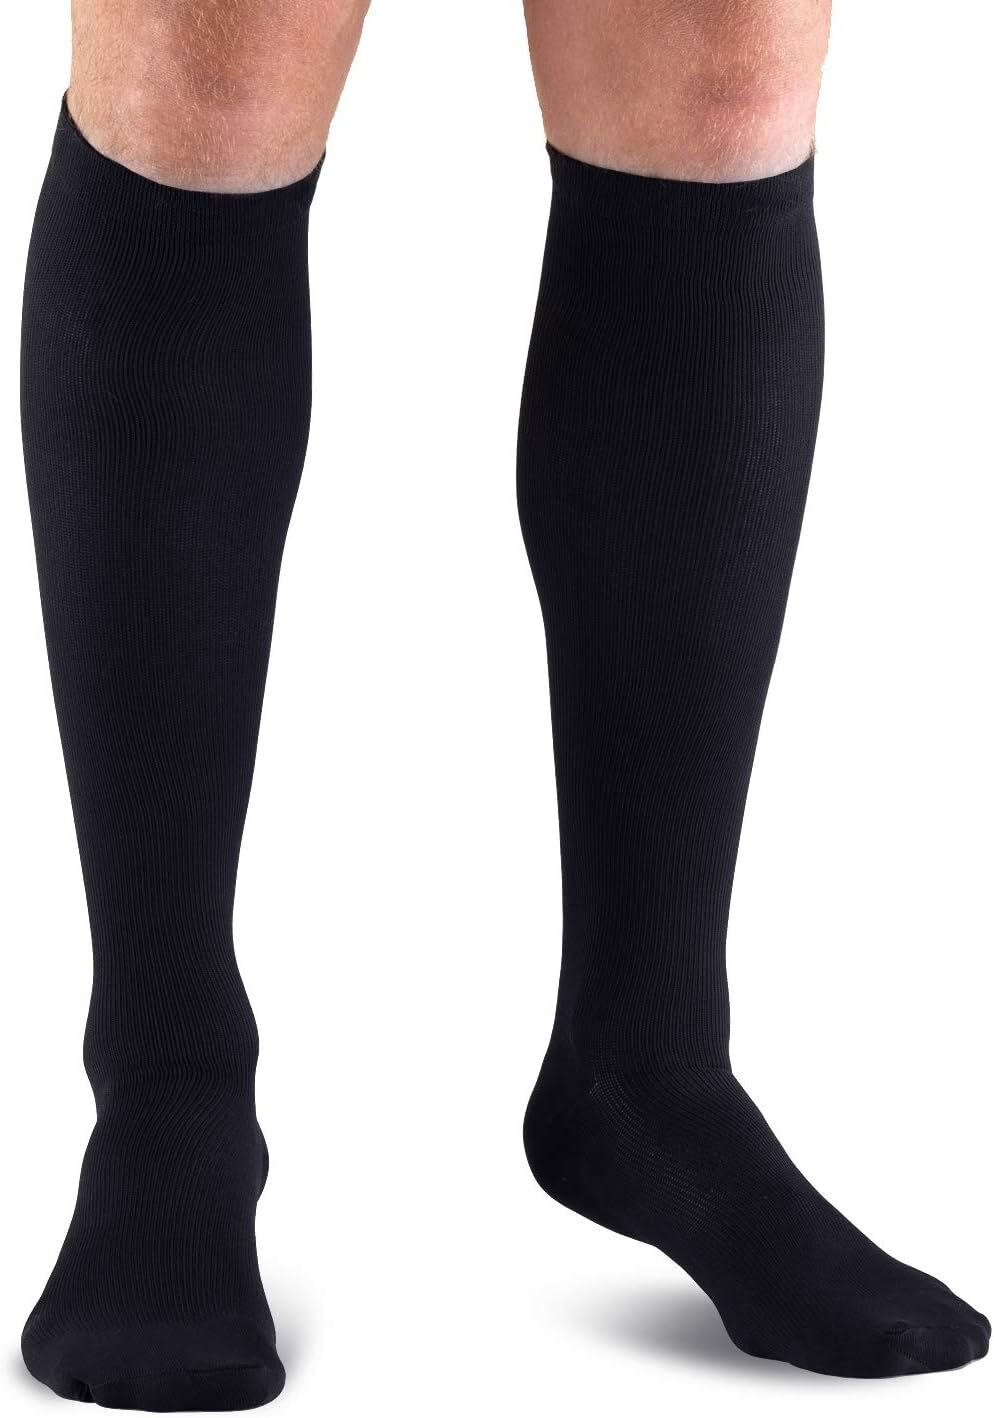 Lewis N. Clark Compact Travel Compression Socks Anti Fatigue Support - Black - One Size